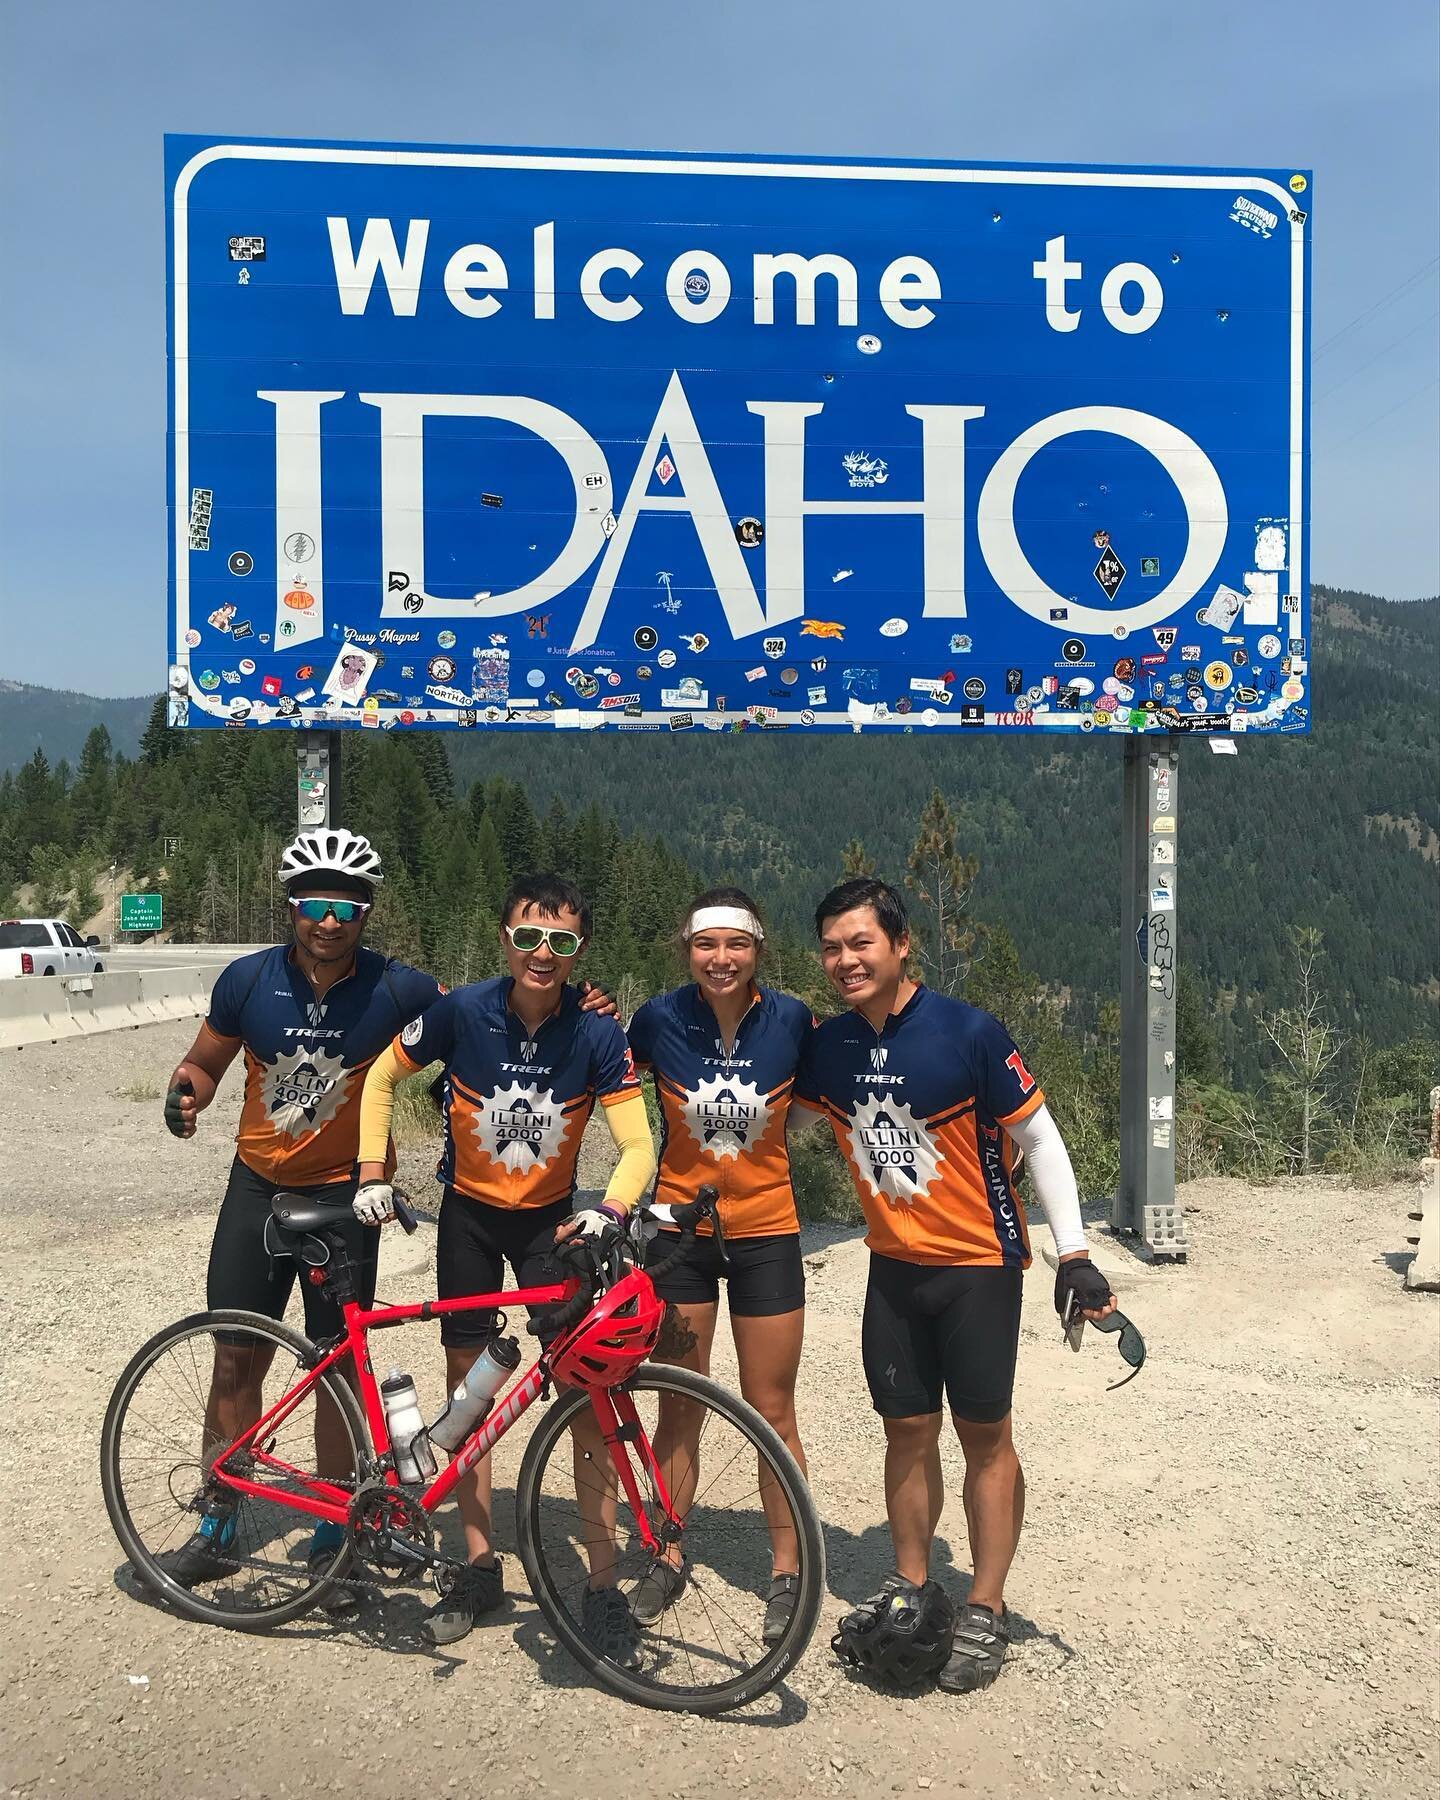 Day 57: We crossed another state line biking from Superior MT, to Pinehurst, ID! In total we biked 76.6 miles! We&rsquo;re slowly making our way into the Pacific Northwest Region! 🙌🏼
**Follow our team blog below**
http://illini4000.org/journals
.
.